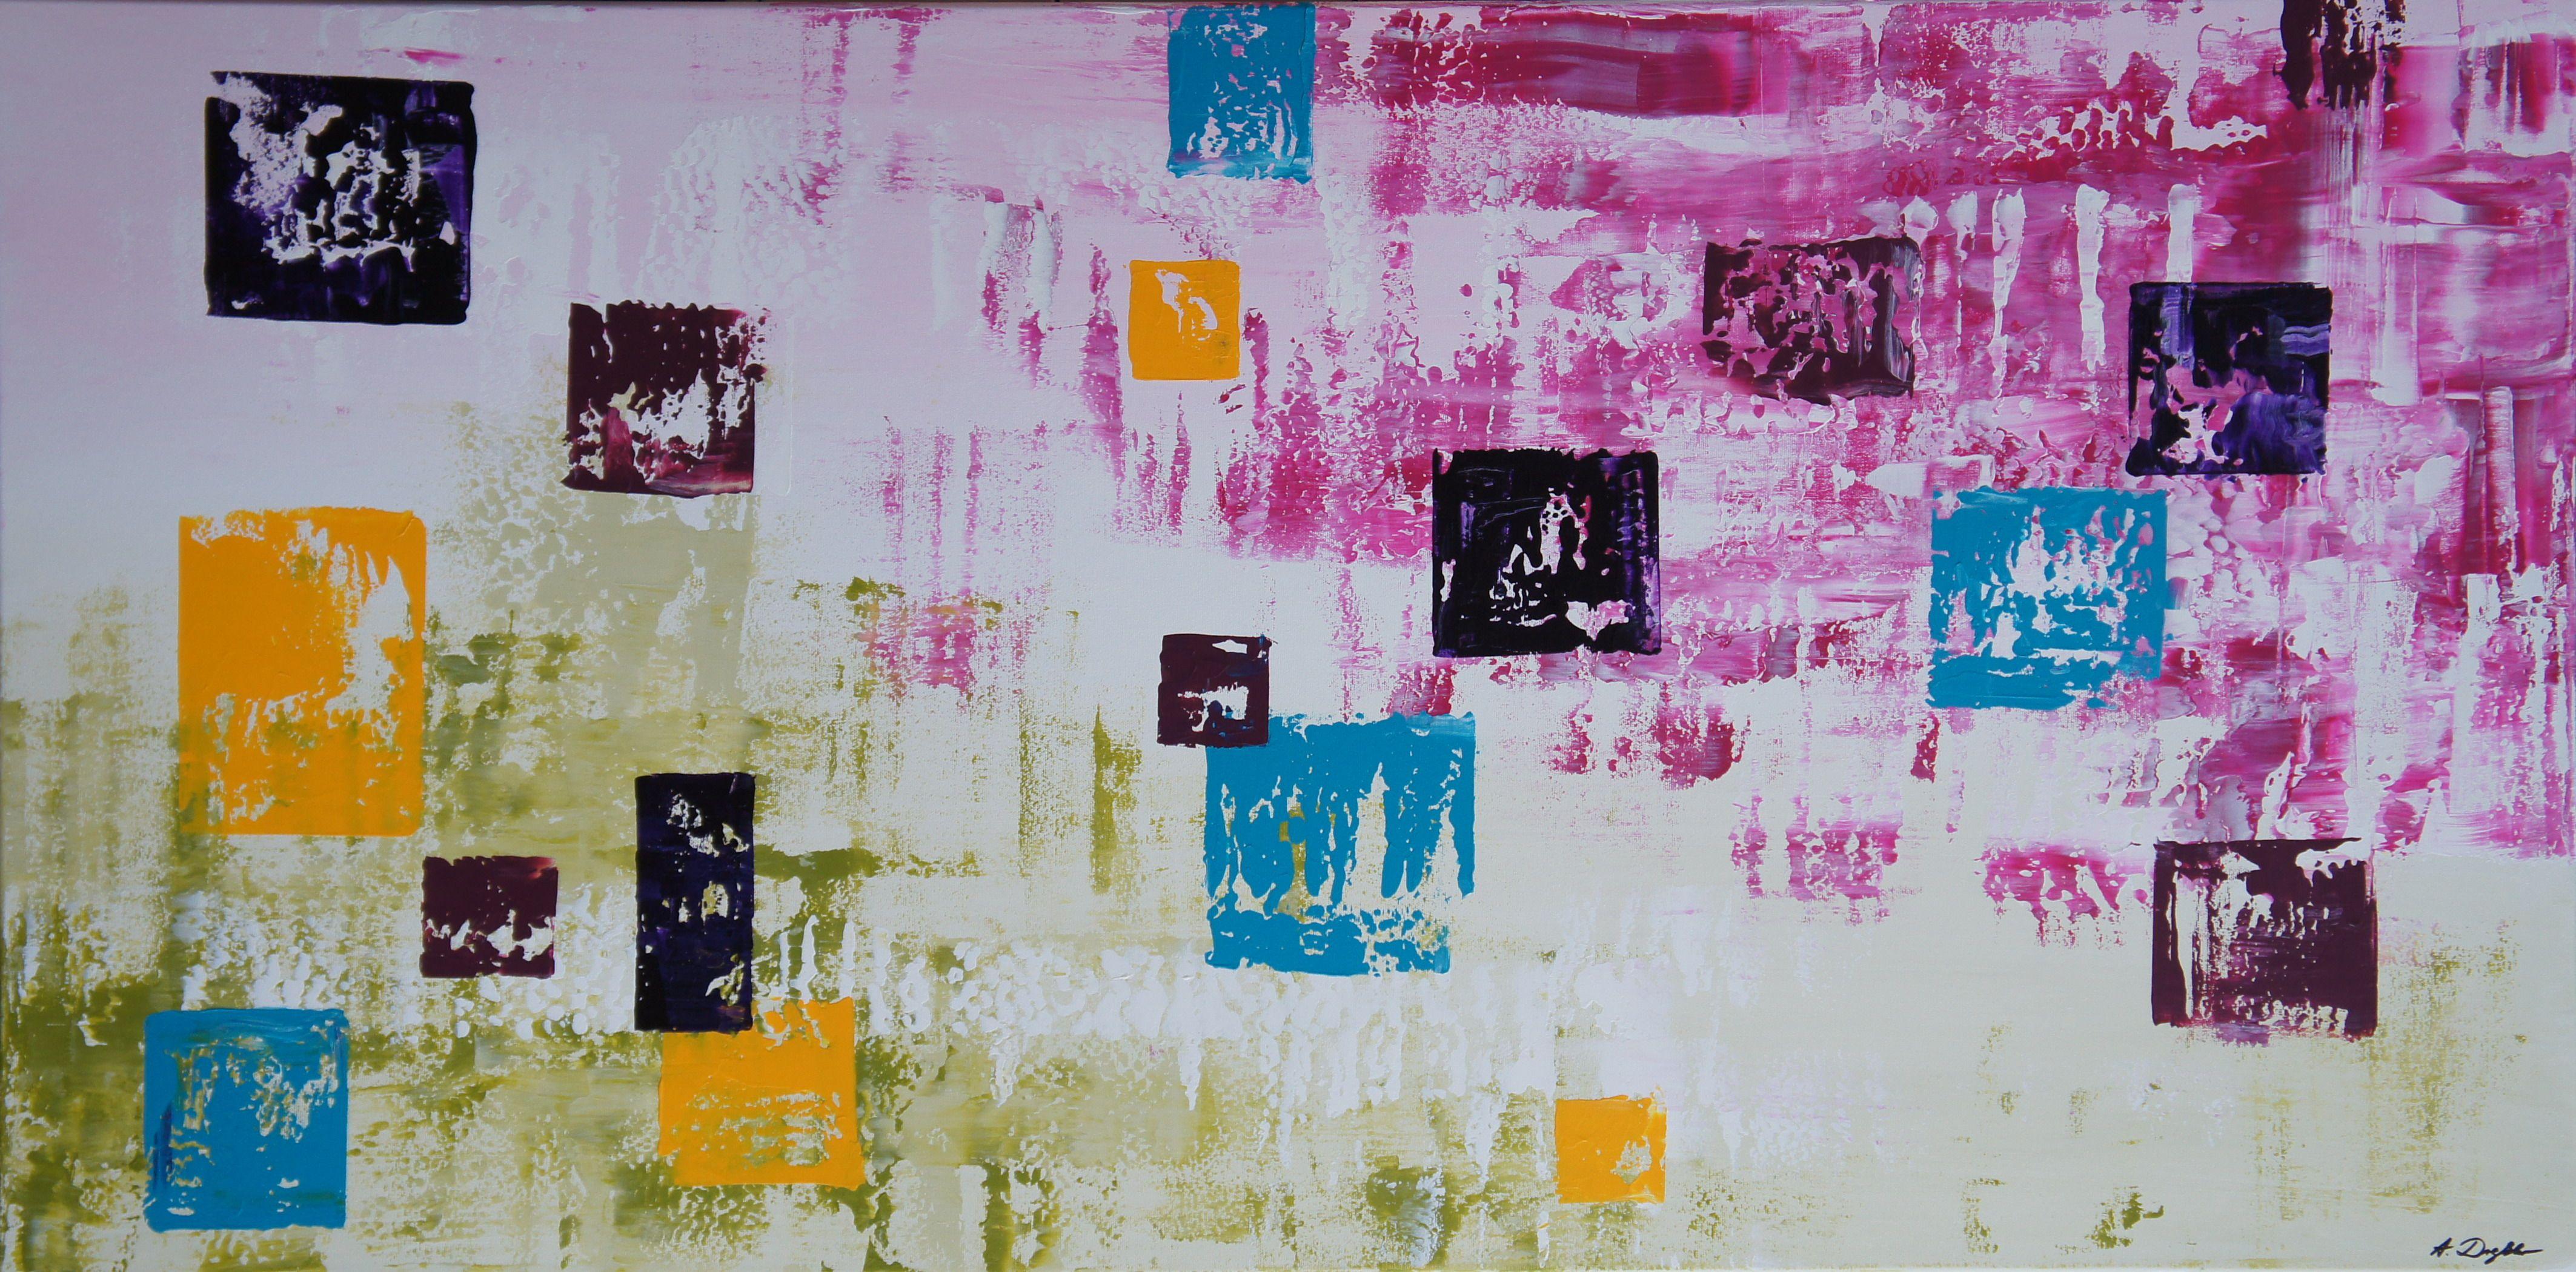 Ansgar Dressler Abstract Painting - New Flavors At The Candy Store, Painting, Acrylic on Canvas